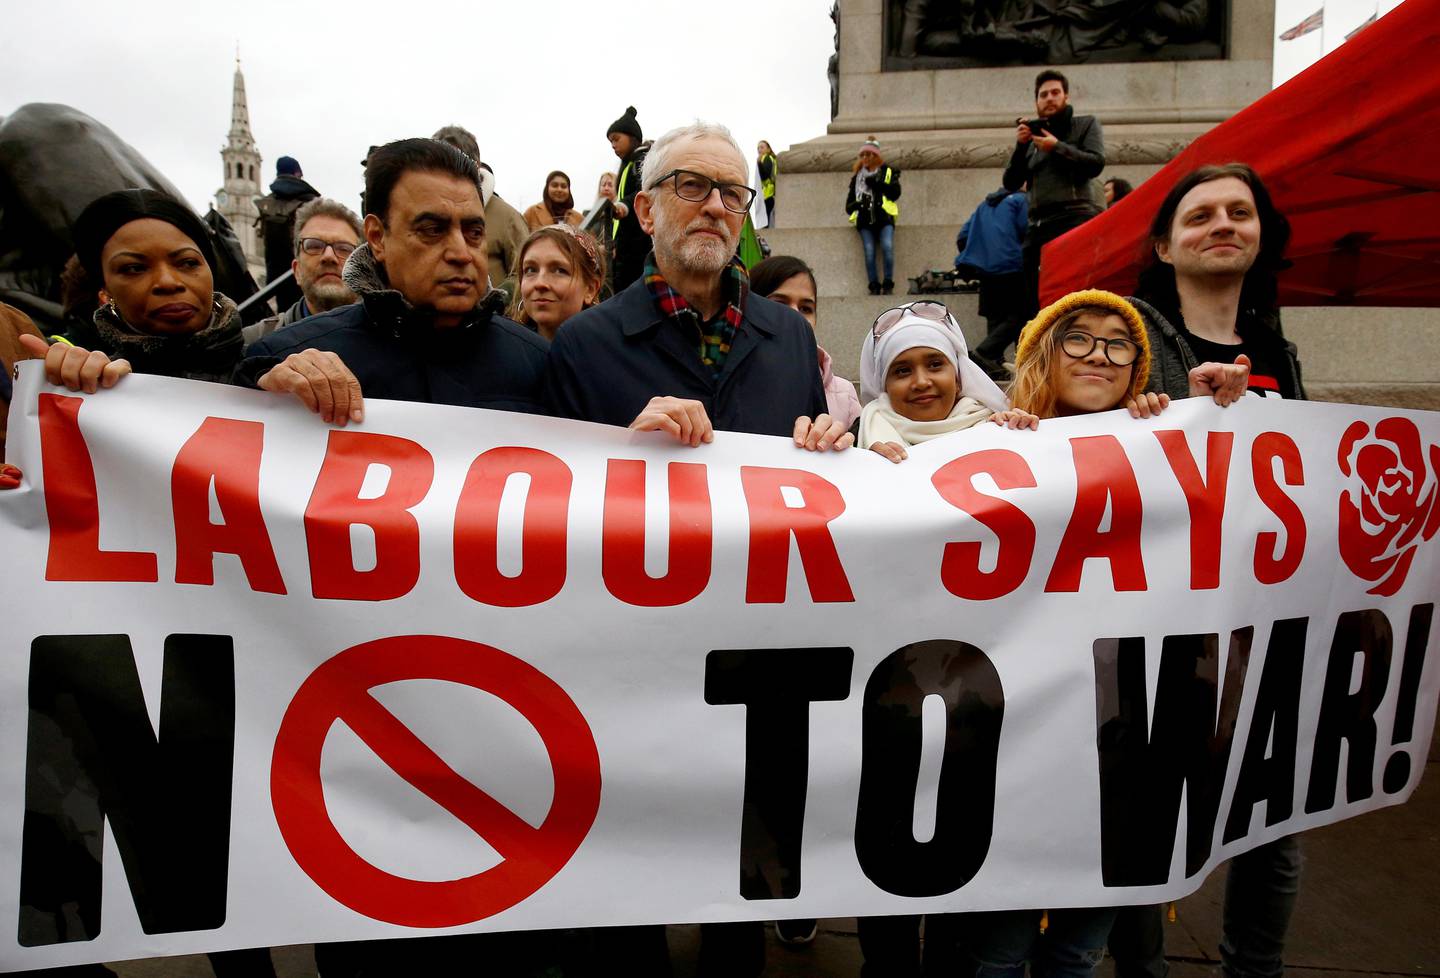 Britain's Labour Party leader Jeremy Corbyn carries a banner as he attends a protest to oppose the threat of war with Iran, in London, Britain January 11, 2020.  REUTERS/Henry Nicholls